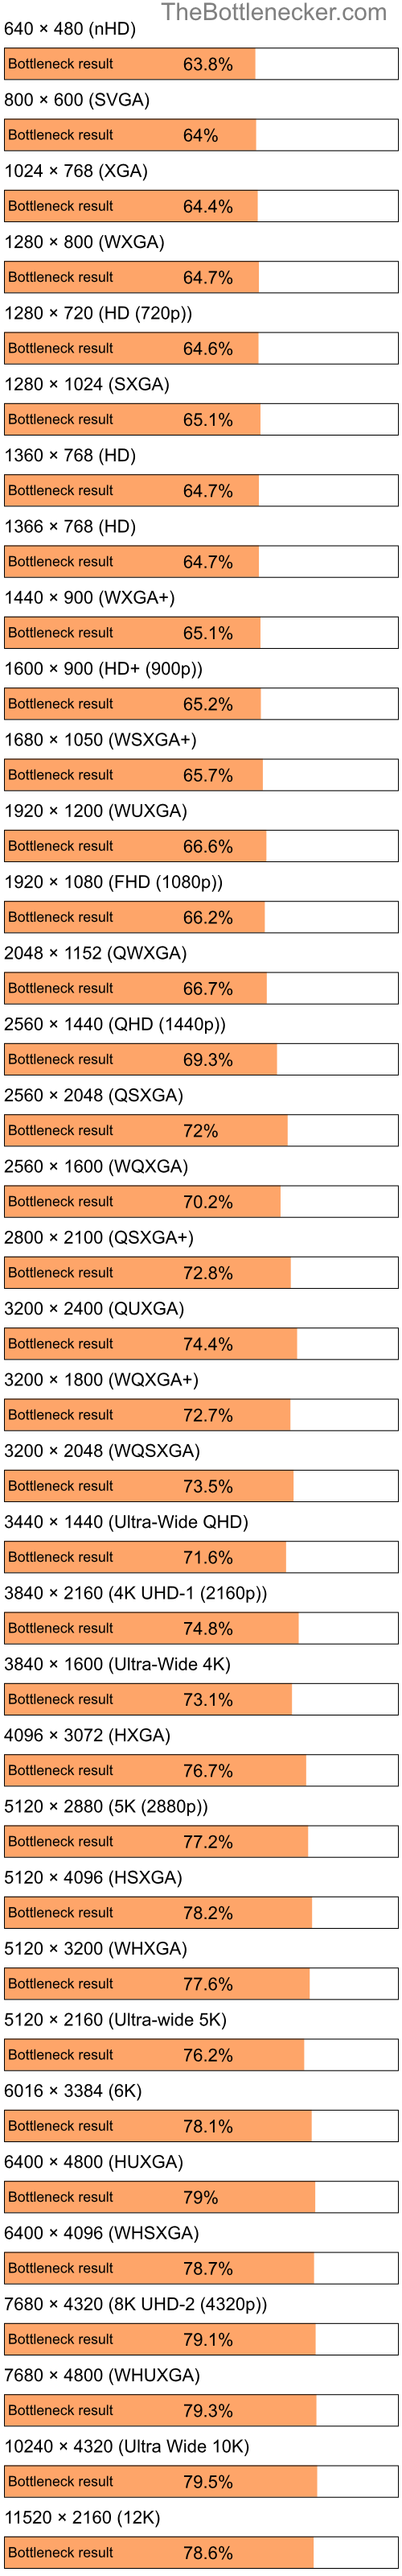 Bottleneck results by resolution for Intel Atom Z520 and AMD Radeon 3000 in7 Days to Die